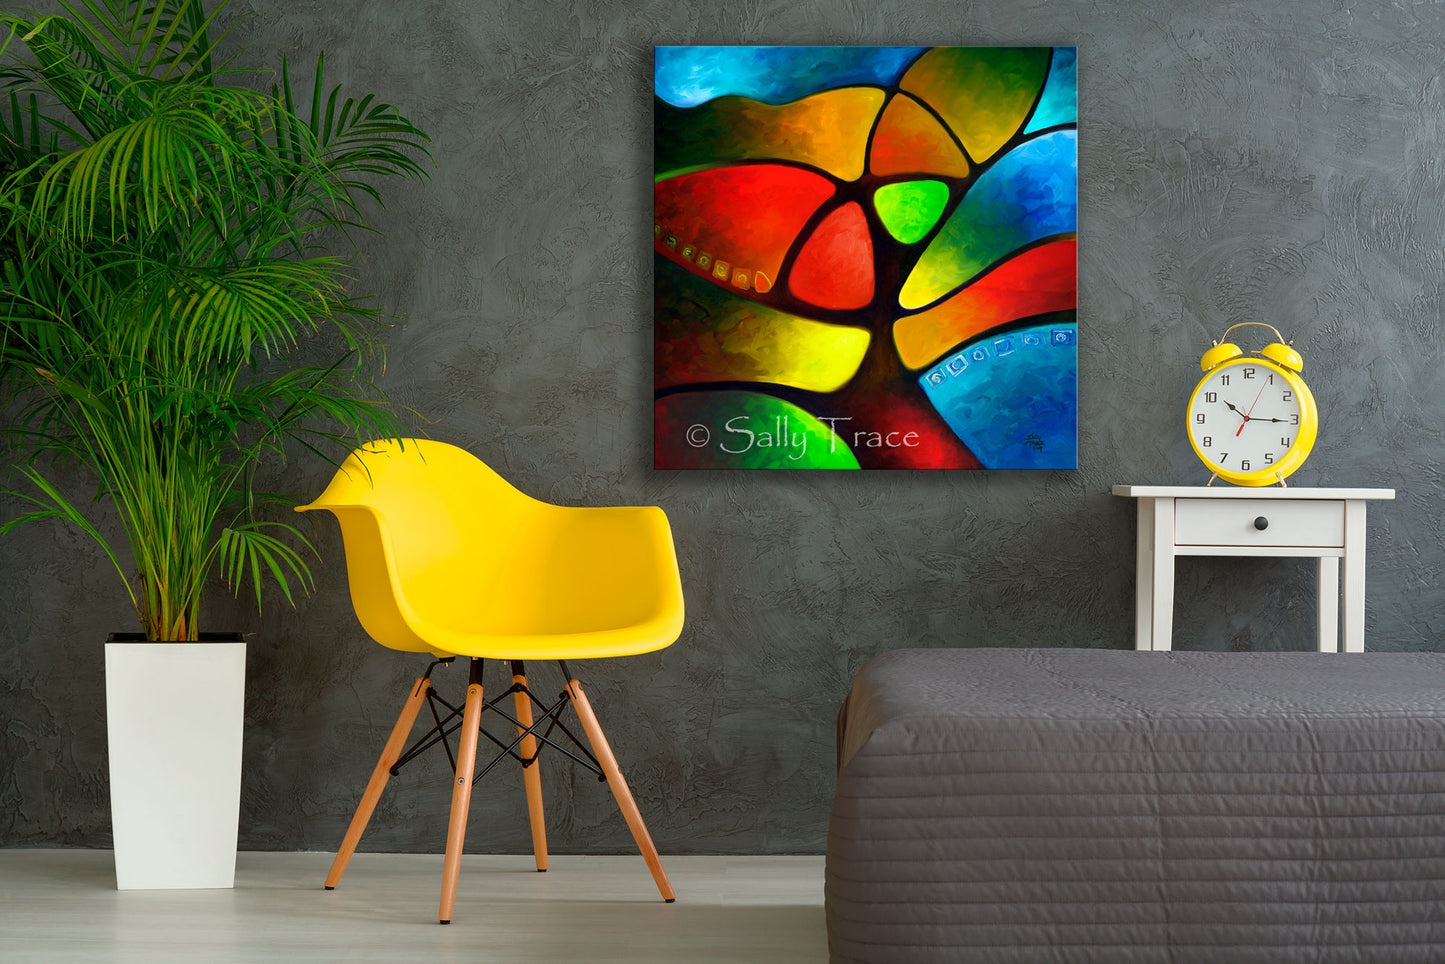 Canvas giclee prints made from my original painting "Geometree", a loose abstract landscape oil painting with saturated colors, earth tones and lively brushwork.